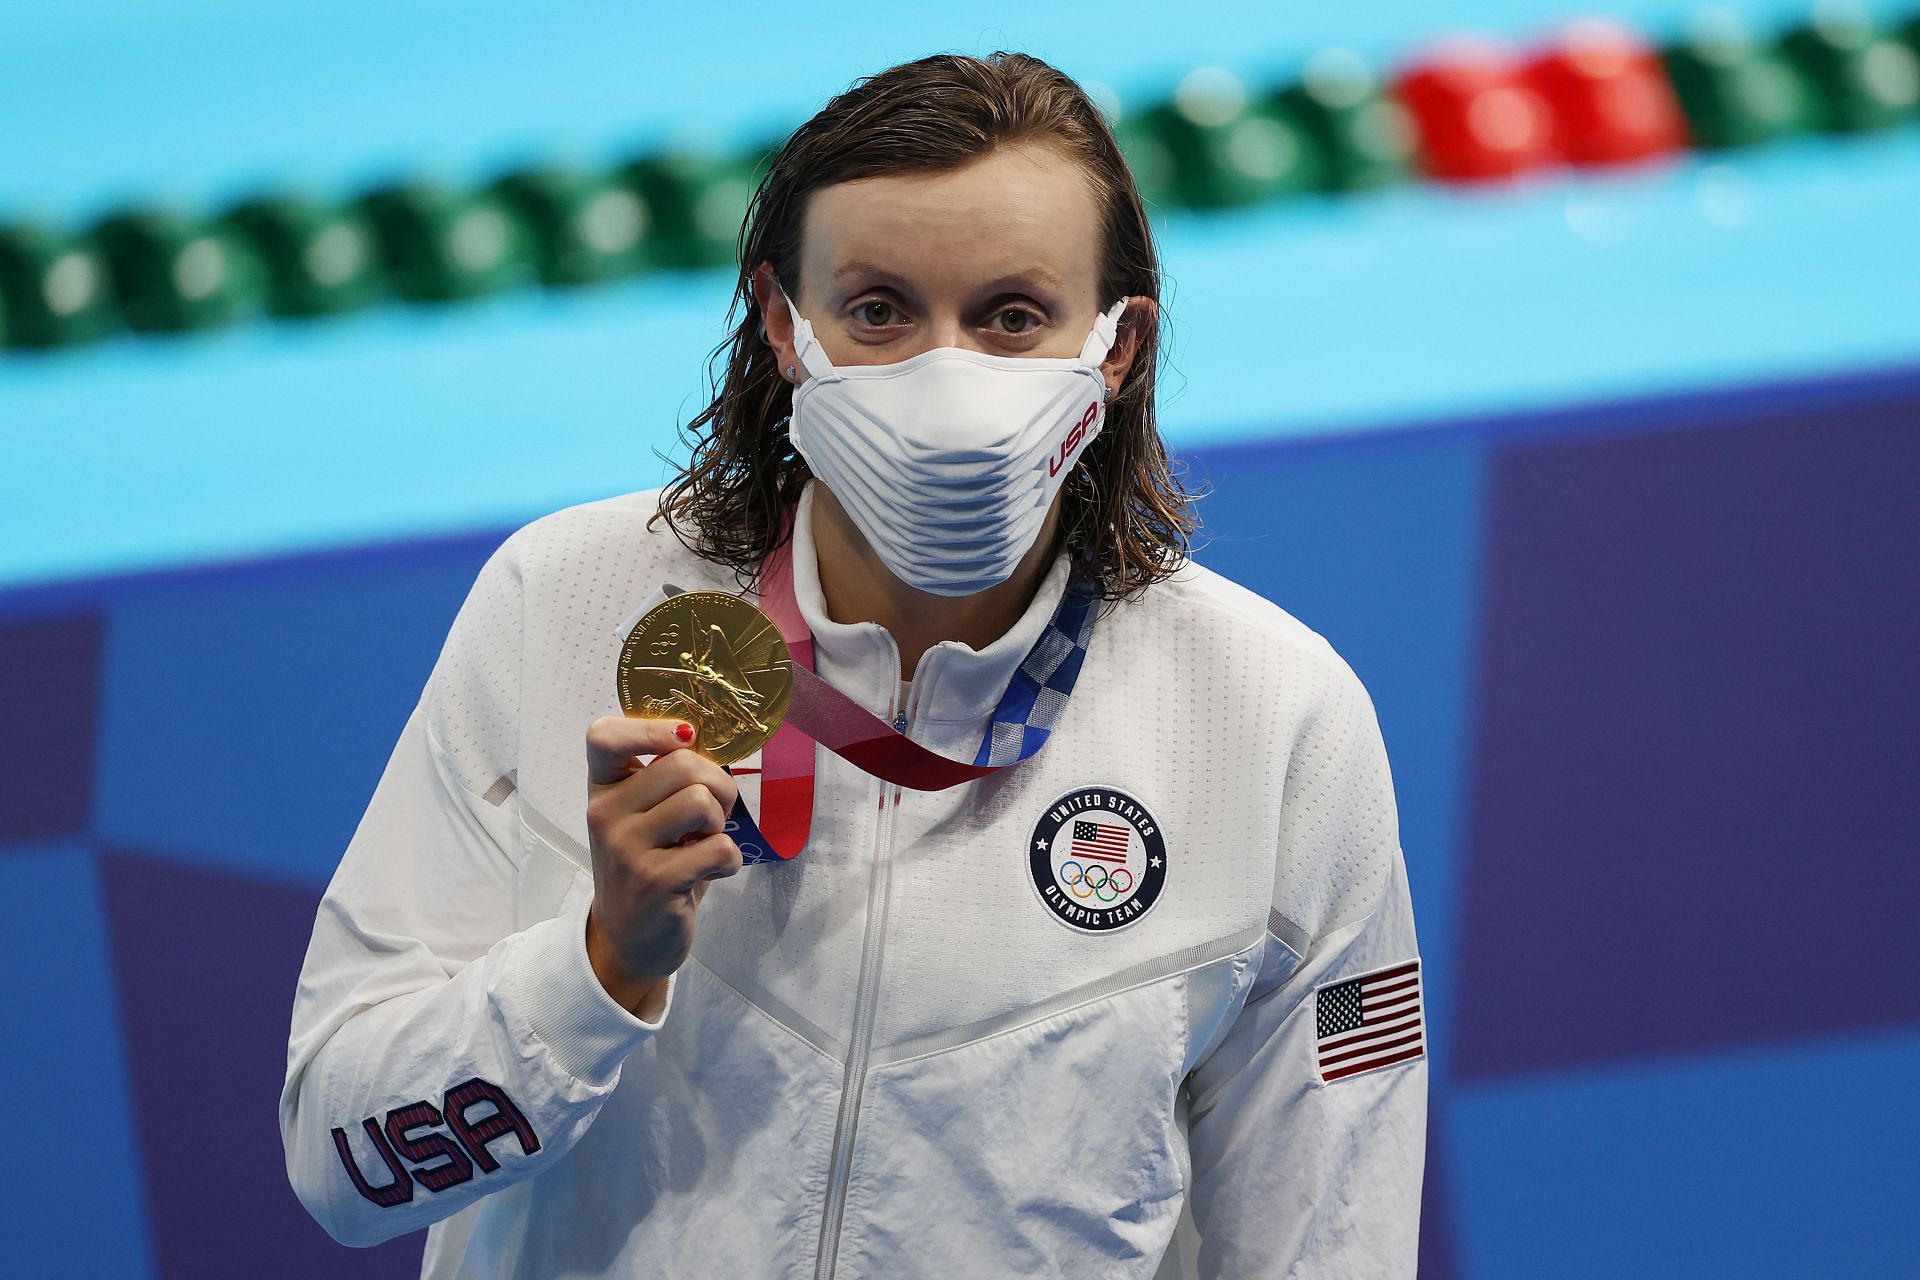 Gold medalist Katie Ledecky of Team United States poses with the medal ceremony for the Women&rsquo;s 800m Freestyle Final at the 2020 Olympic Games in Tokyo, Japan